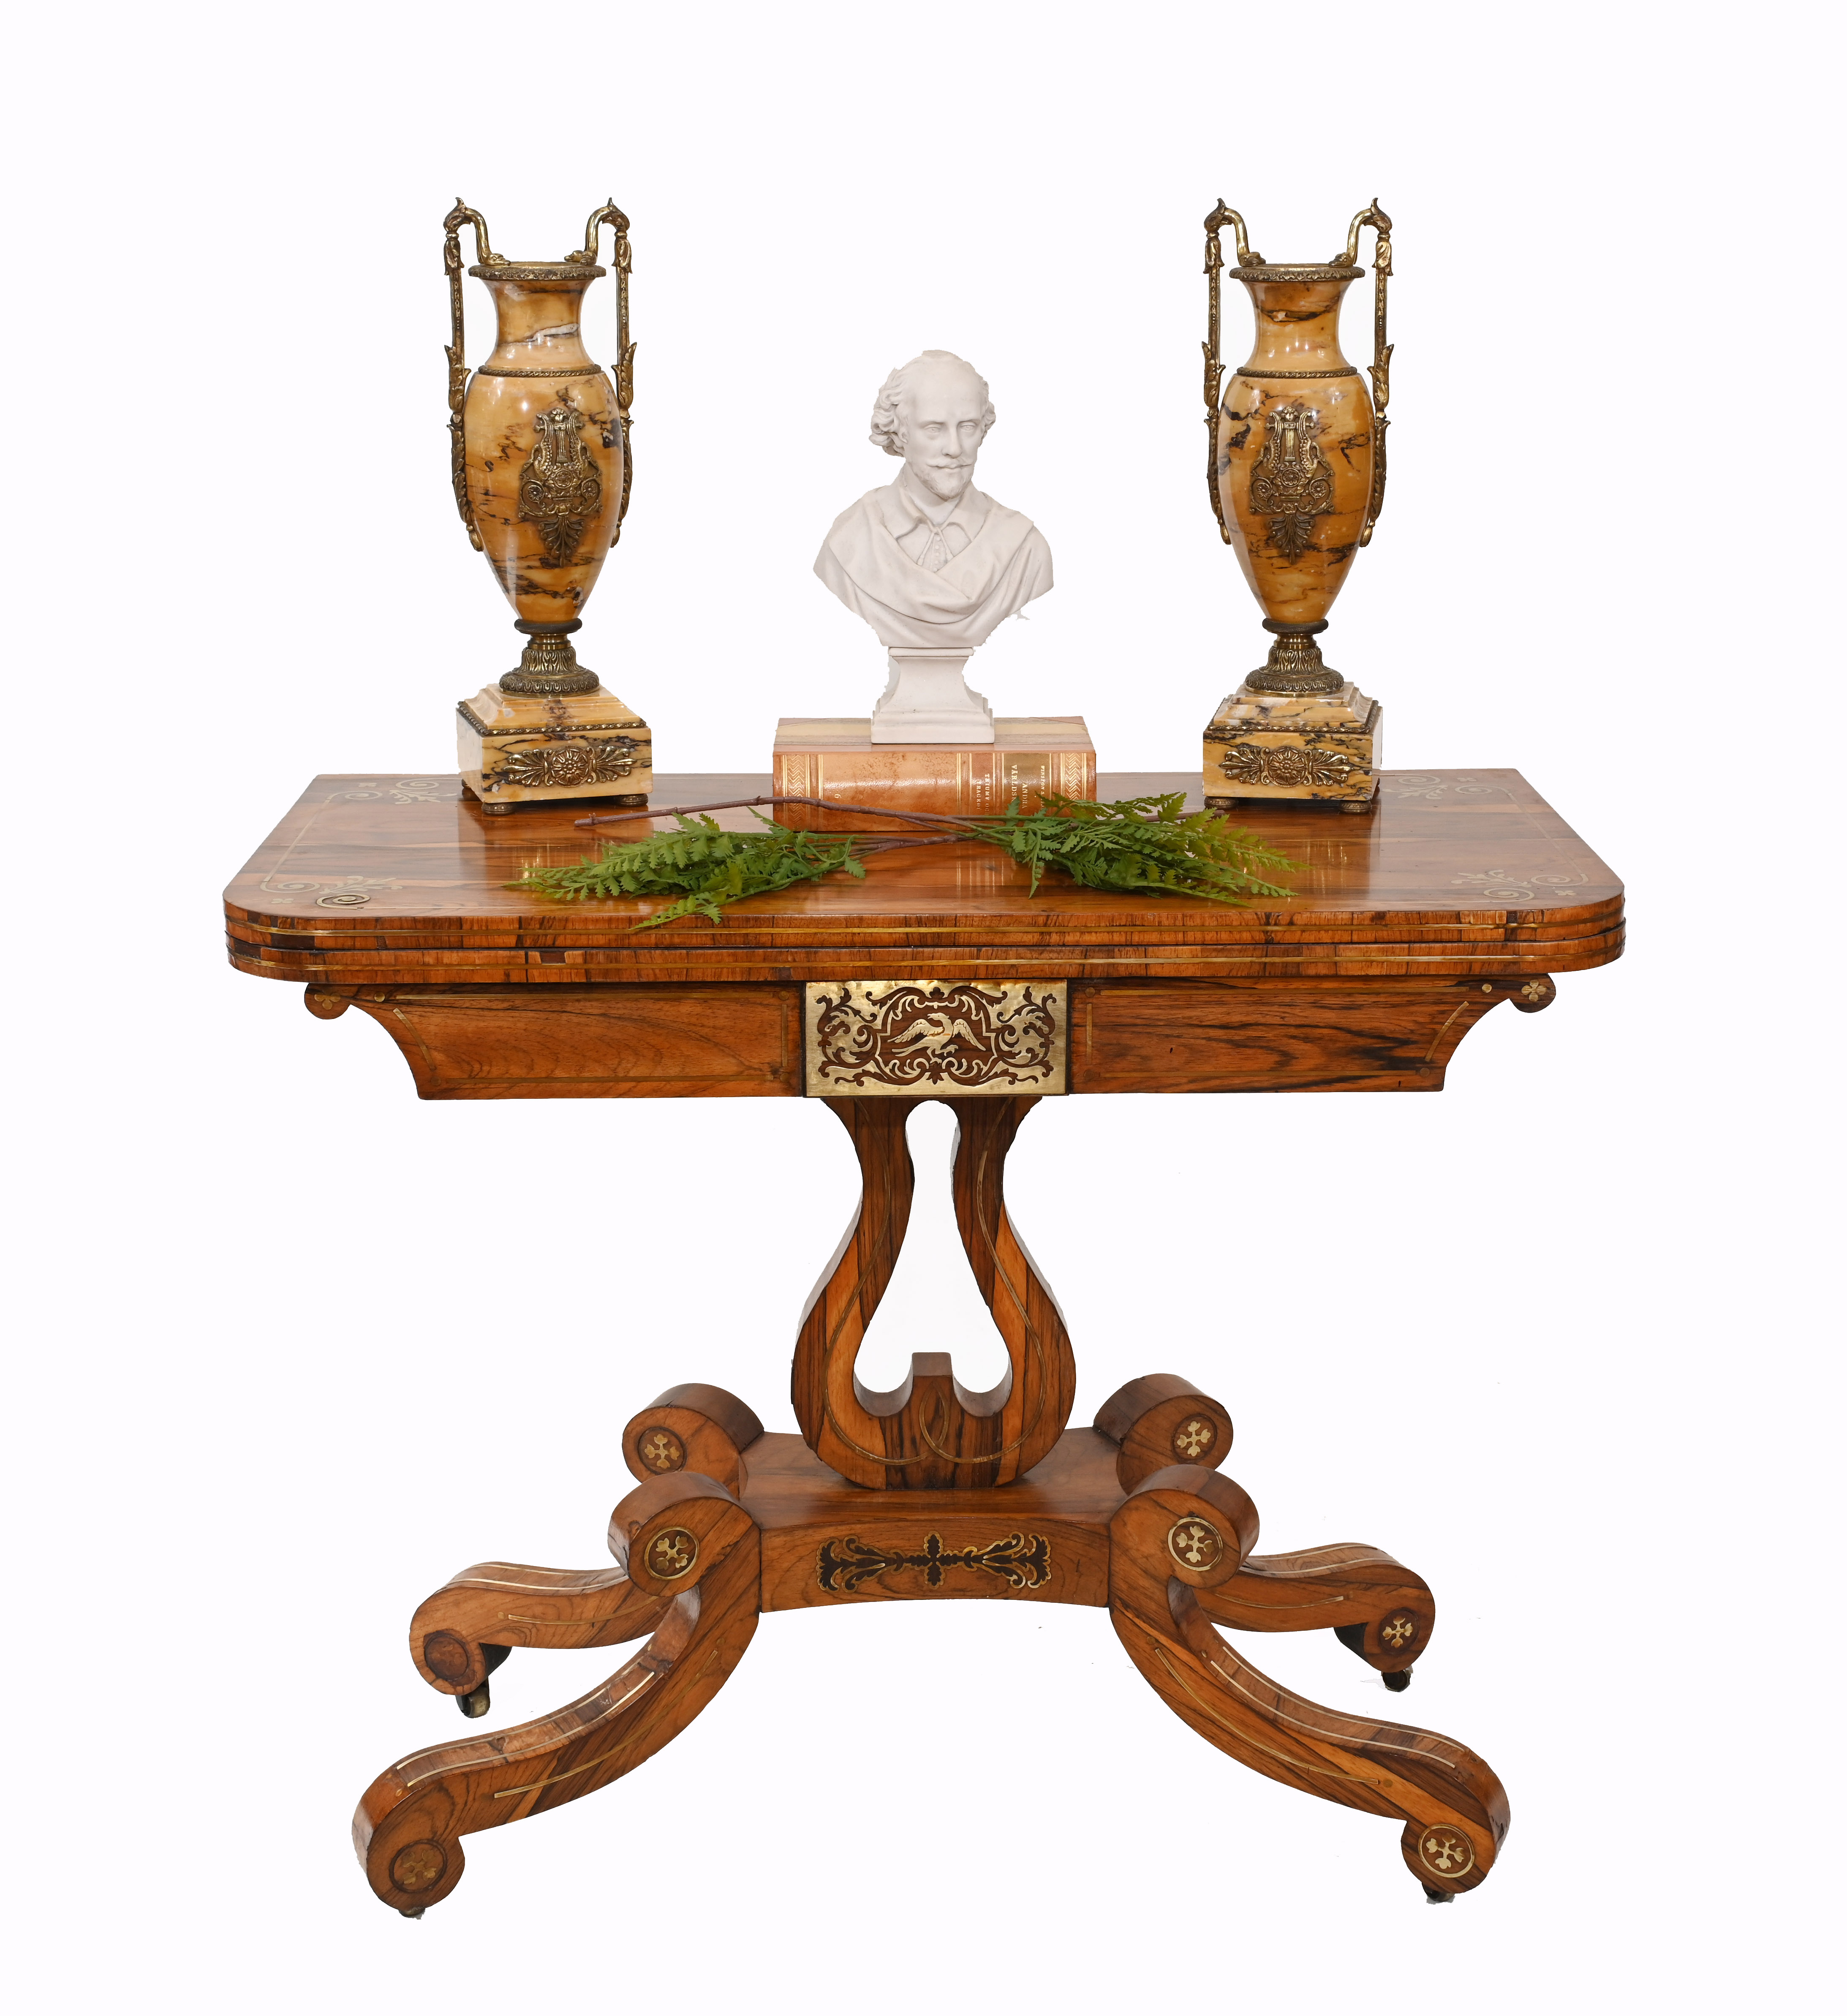 Antique Card Table - Great Orange County product photography